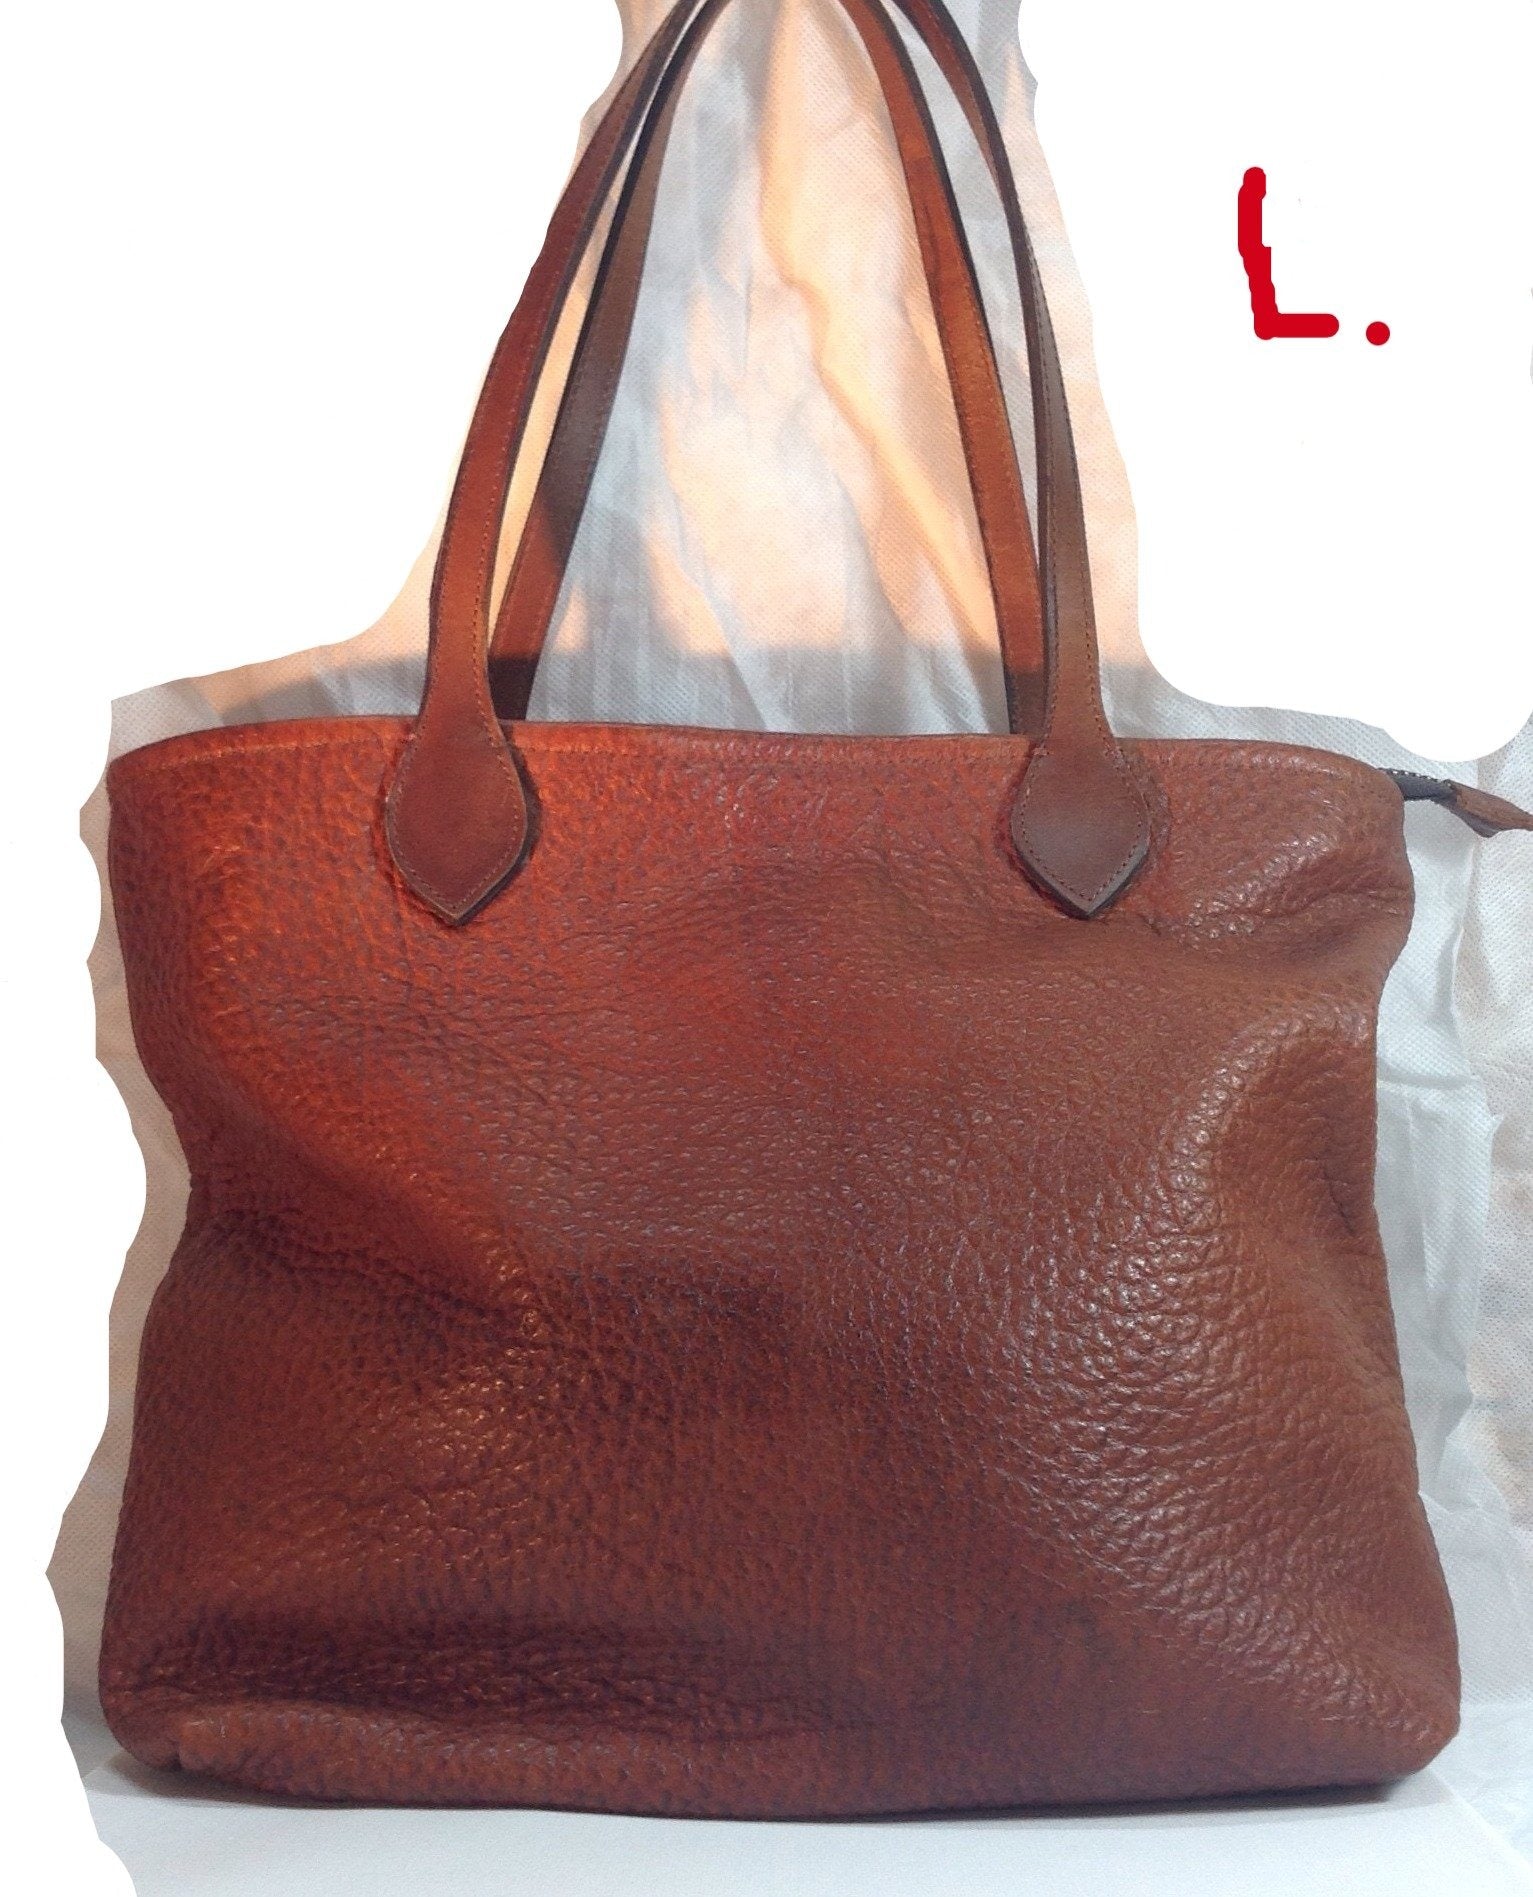 Loma Vista of Texas -  American Bison Leather tote bags and backpacks